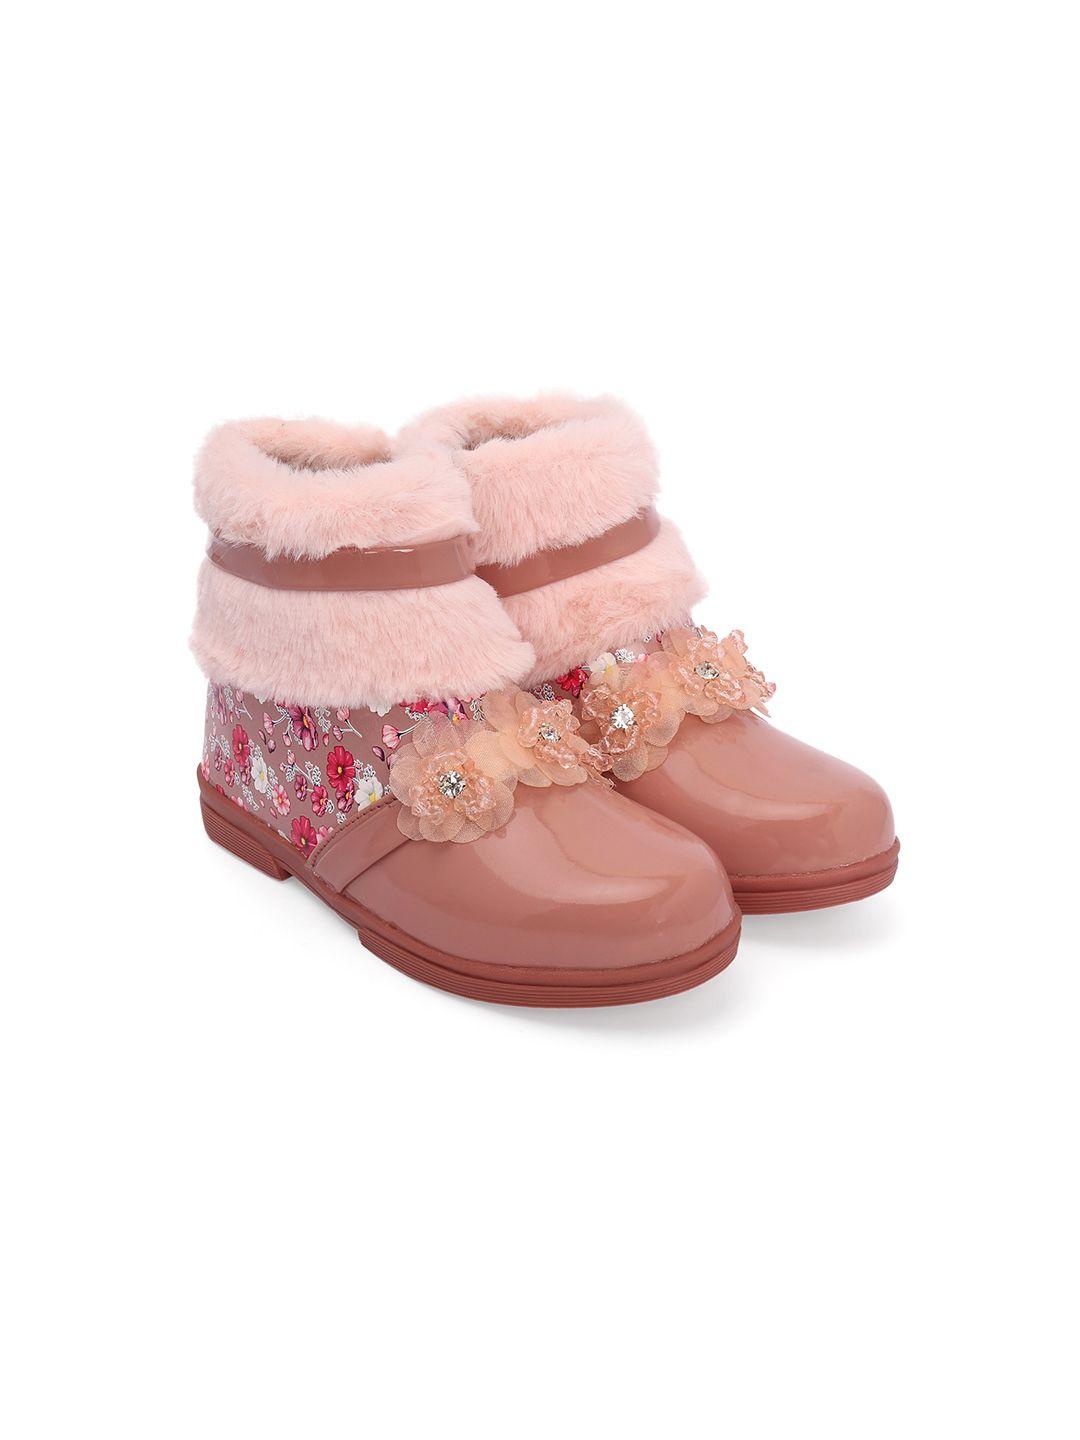 baesd girls printed embellished winter boots